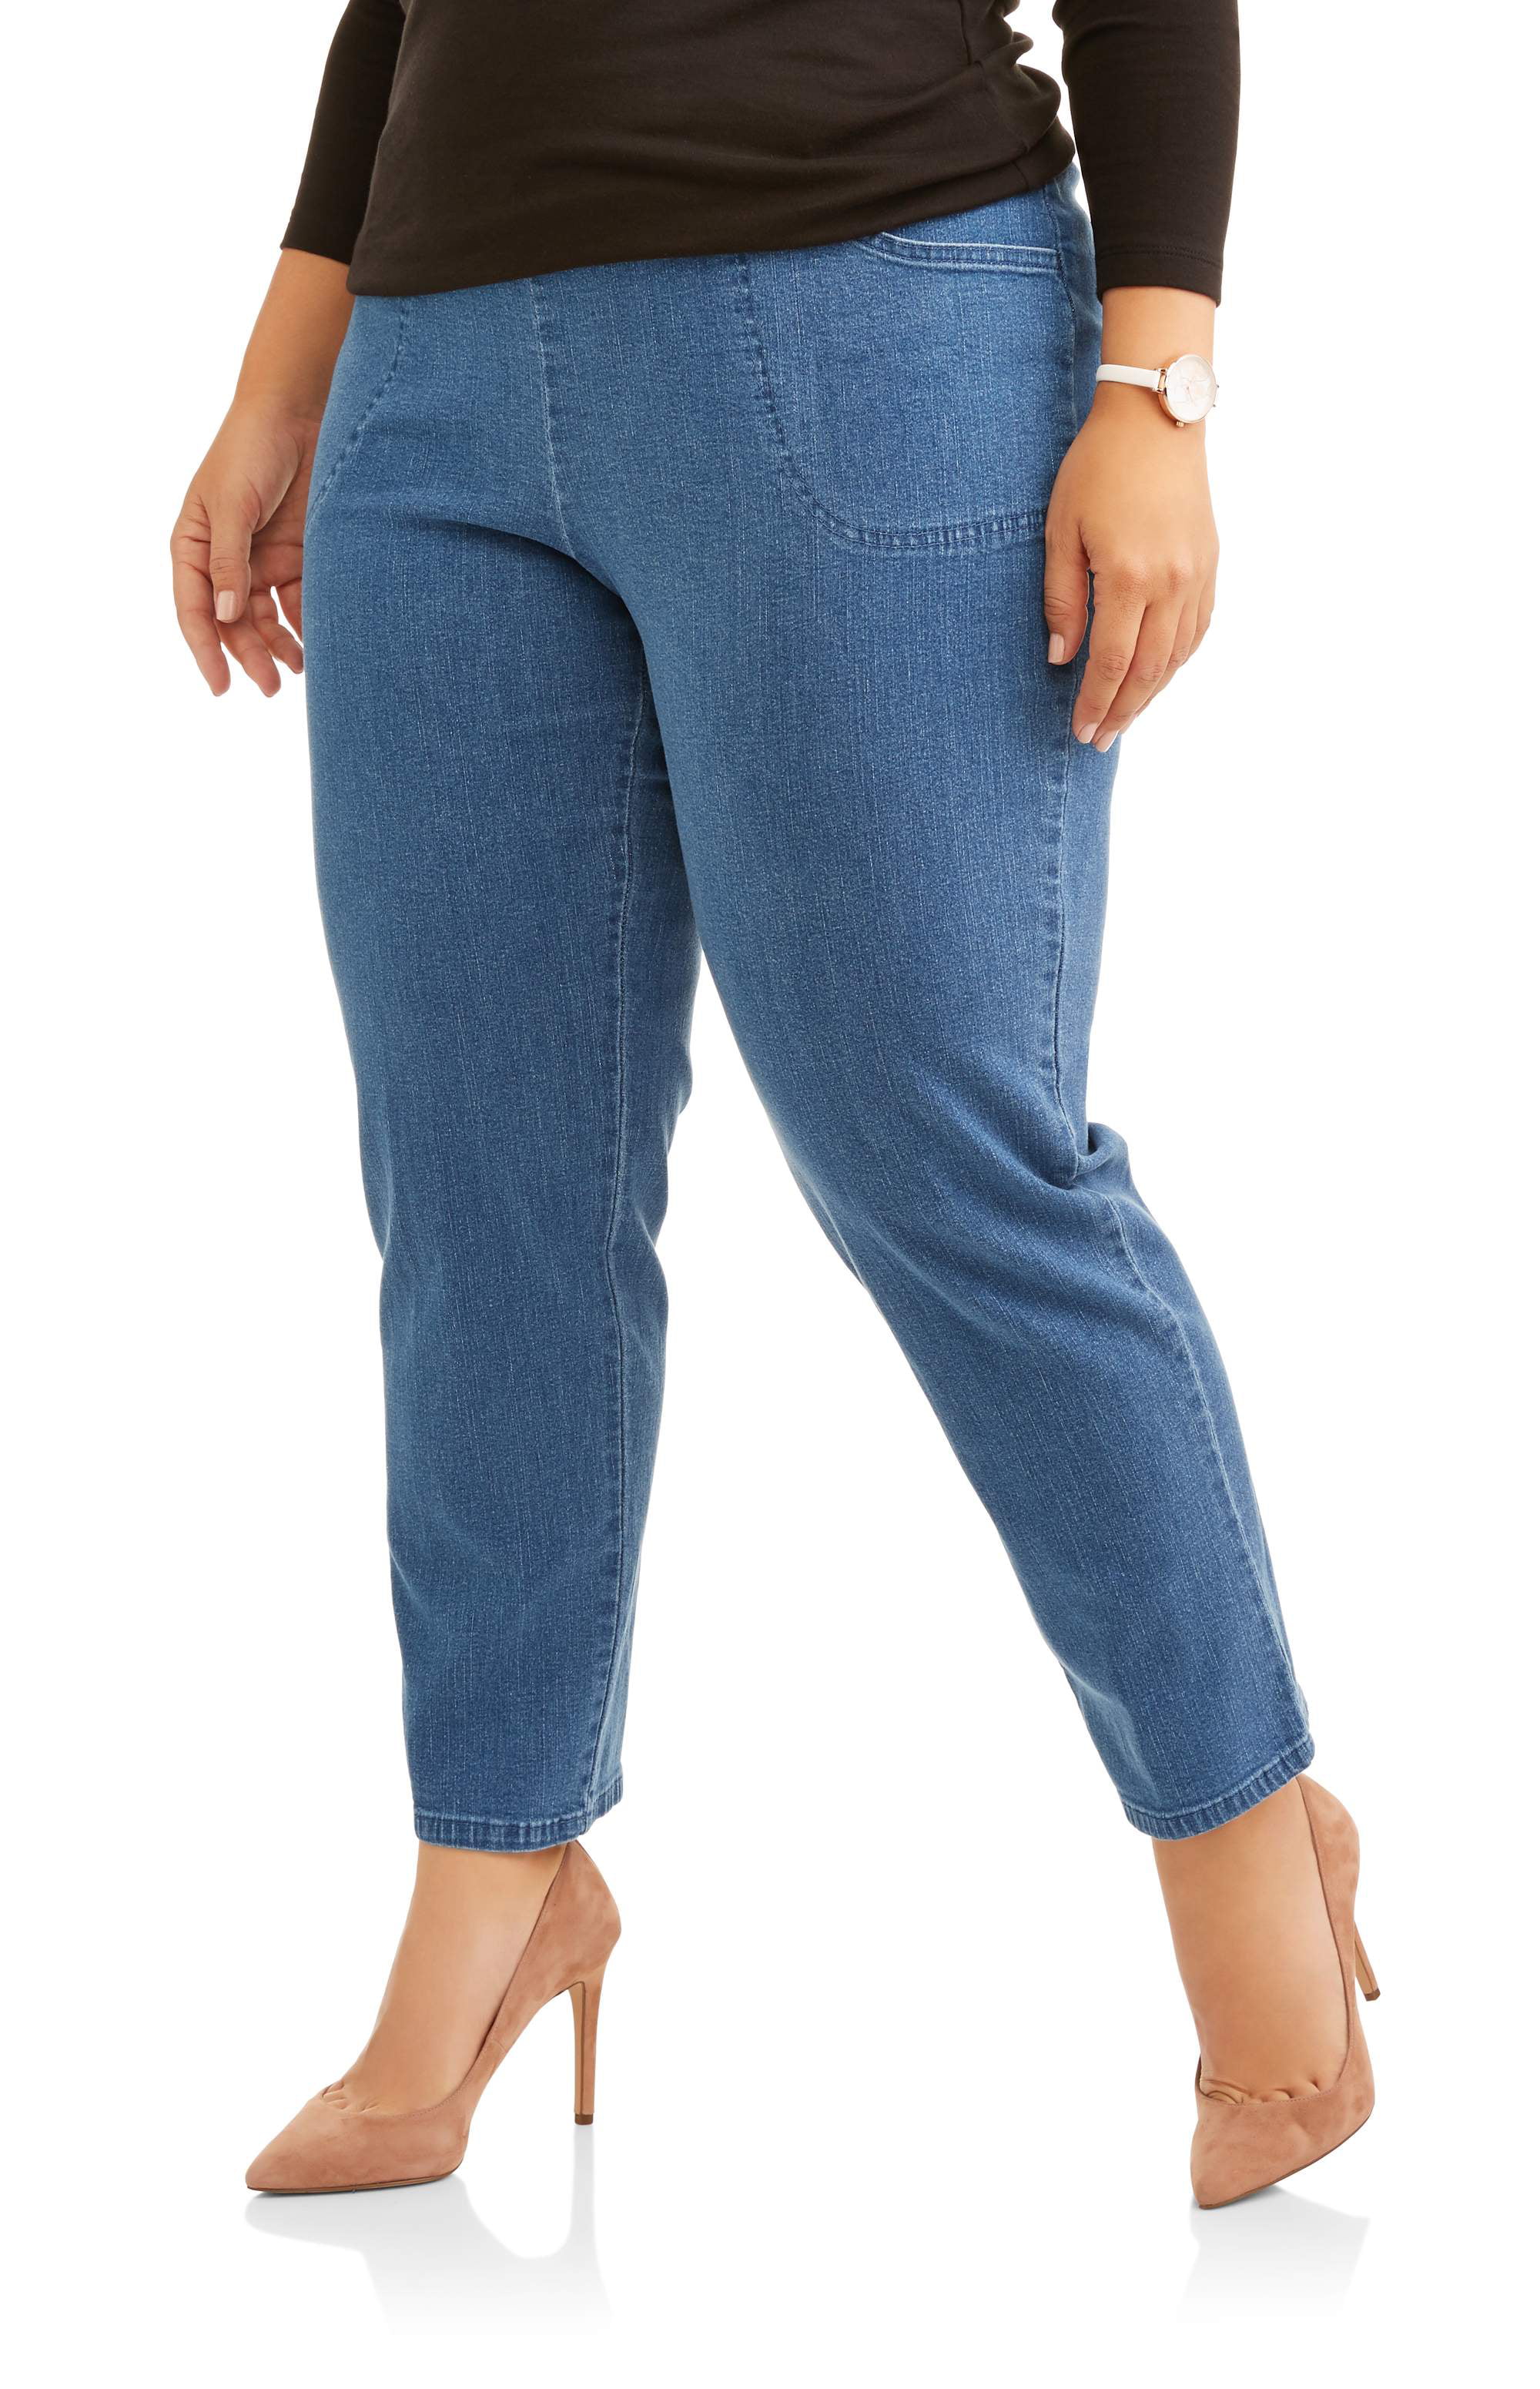 just my size women's petite jeans